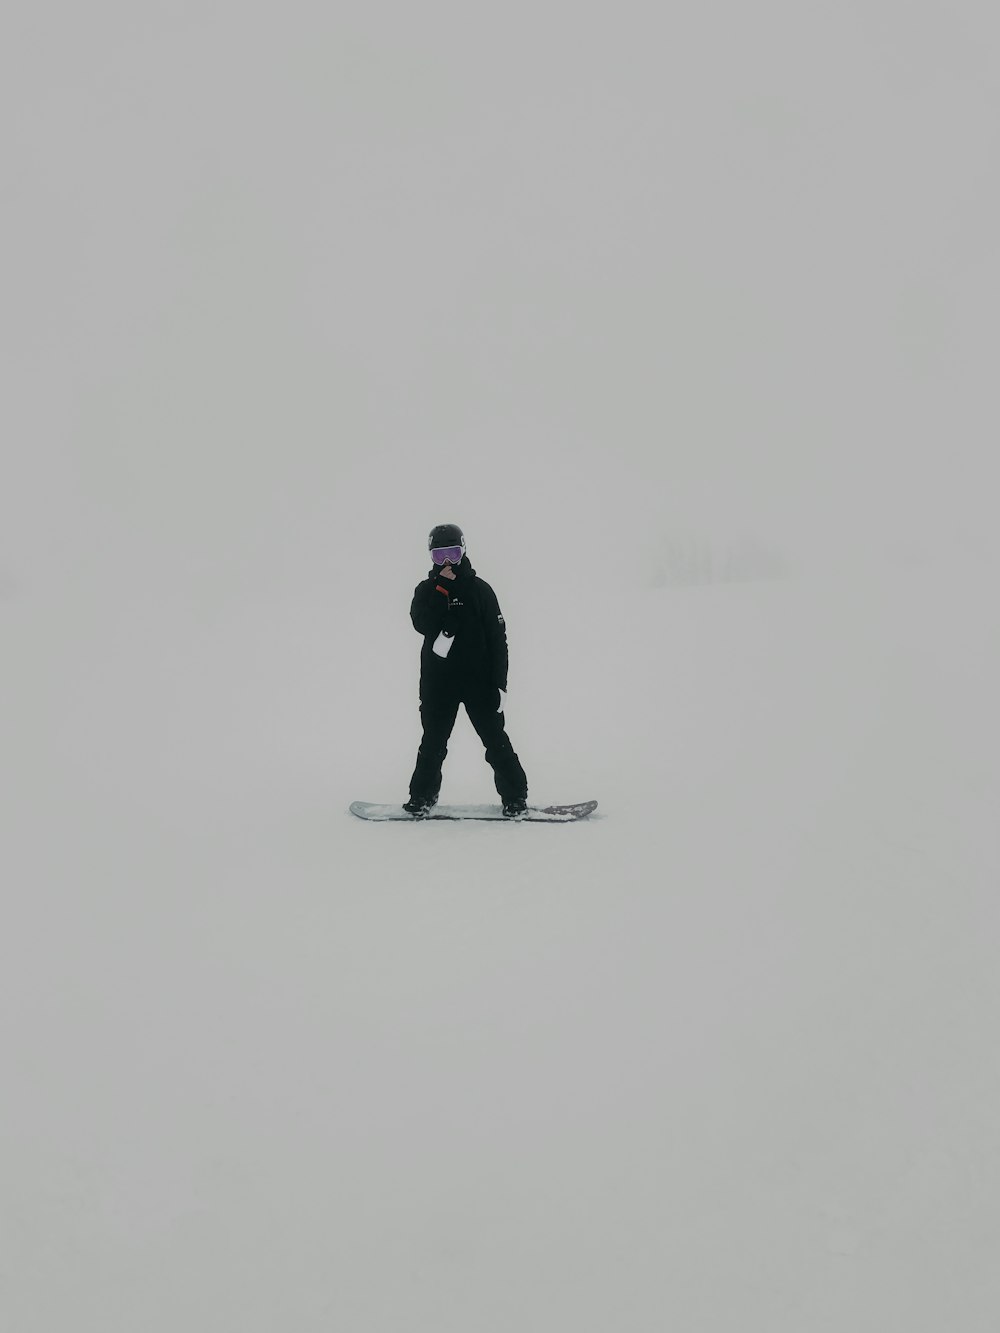 man in black jacket and pants standing on snow covered ground